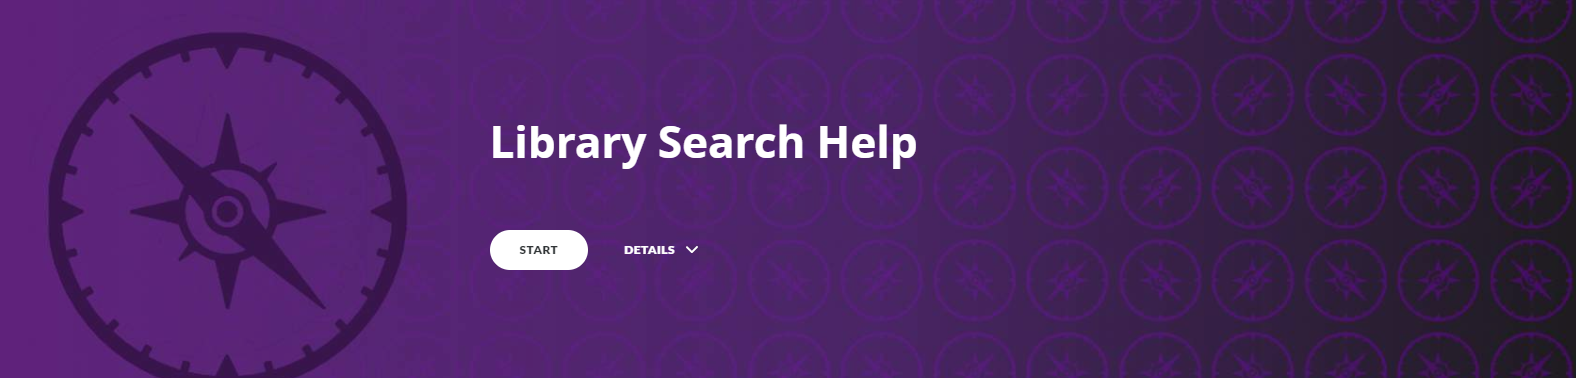 Library search tutorial